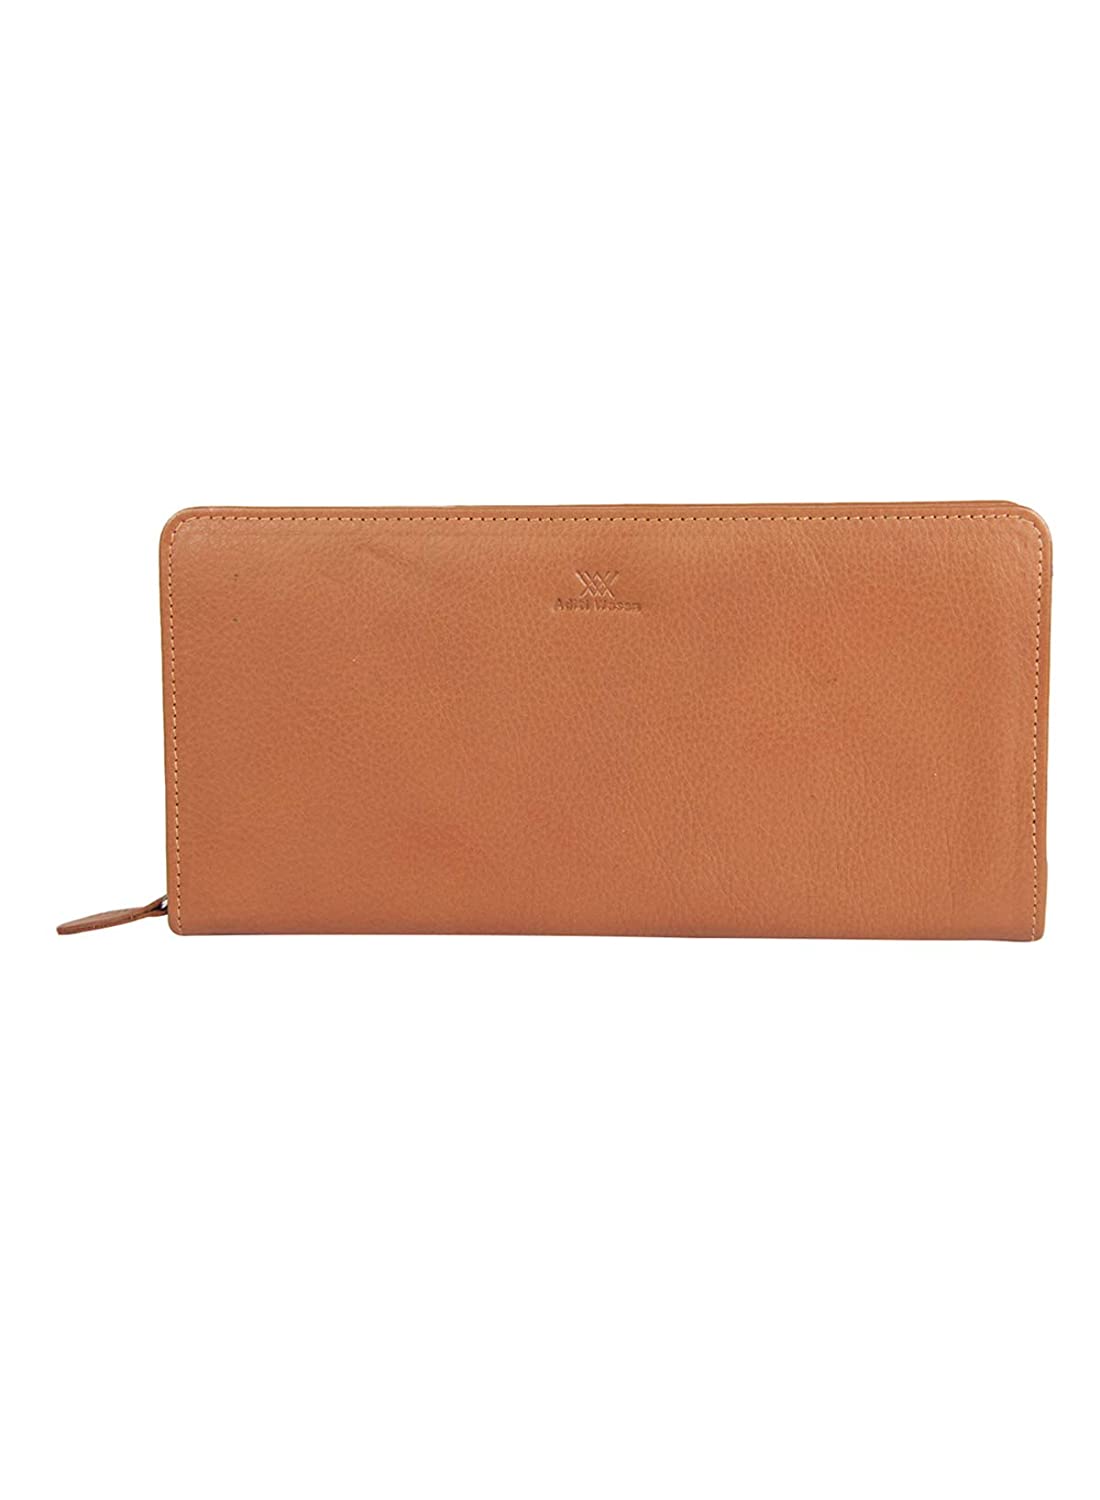 genuine leather tan gusset clutch